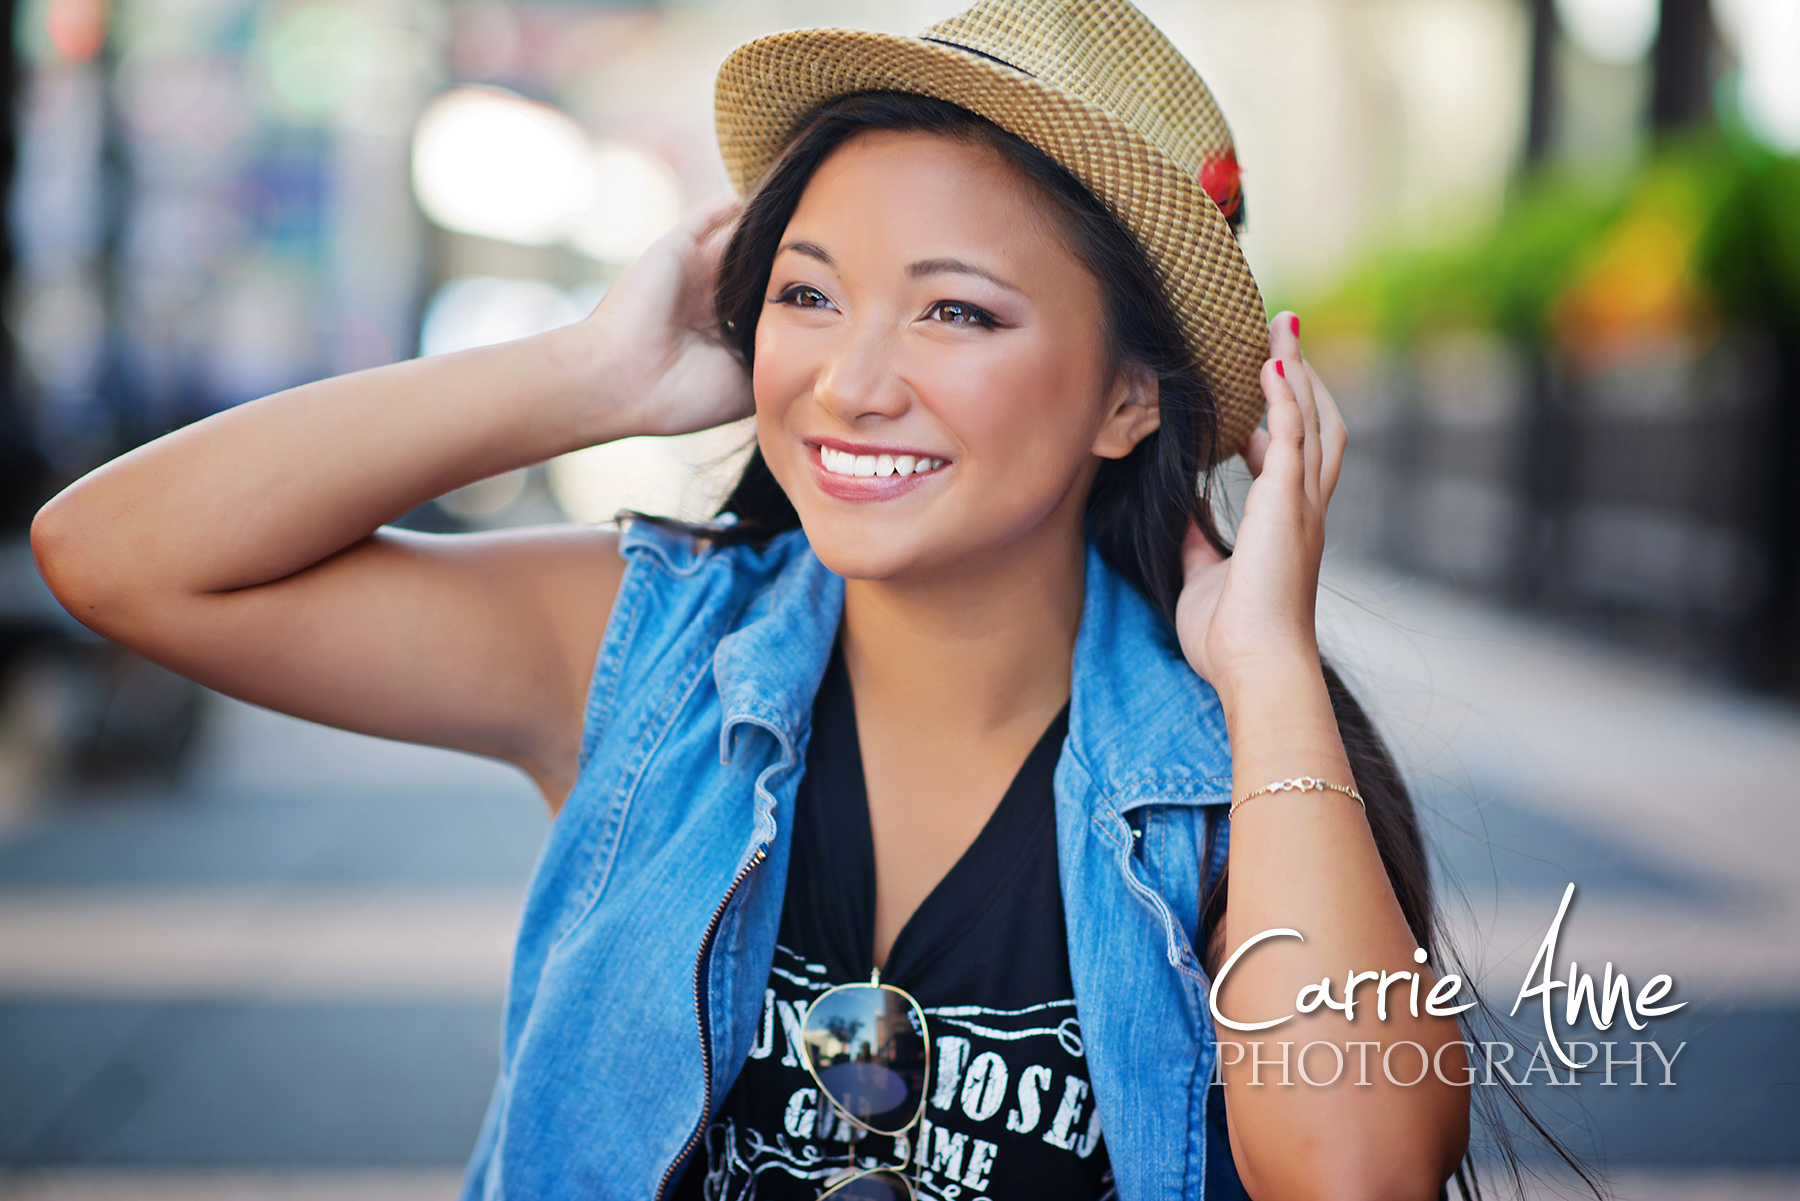 Grand Rapids Senior Pictures : Carrie Anne Photography